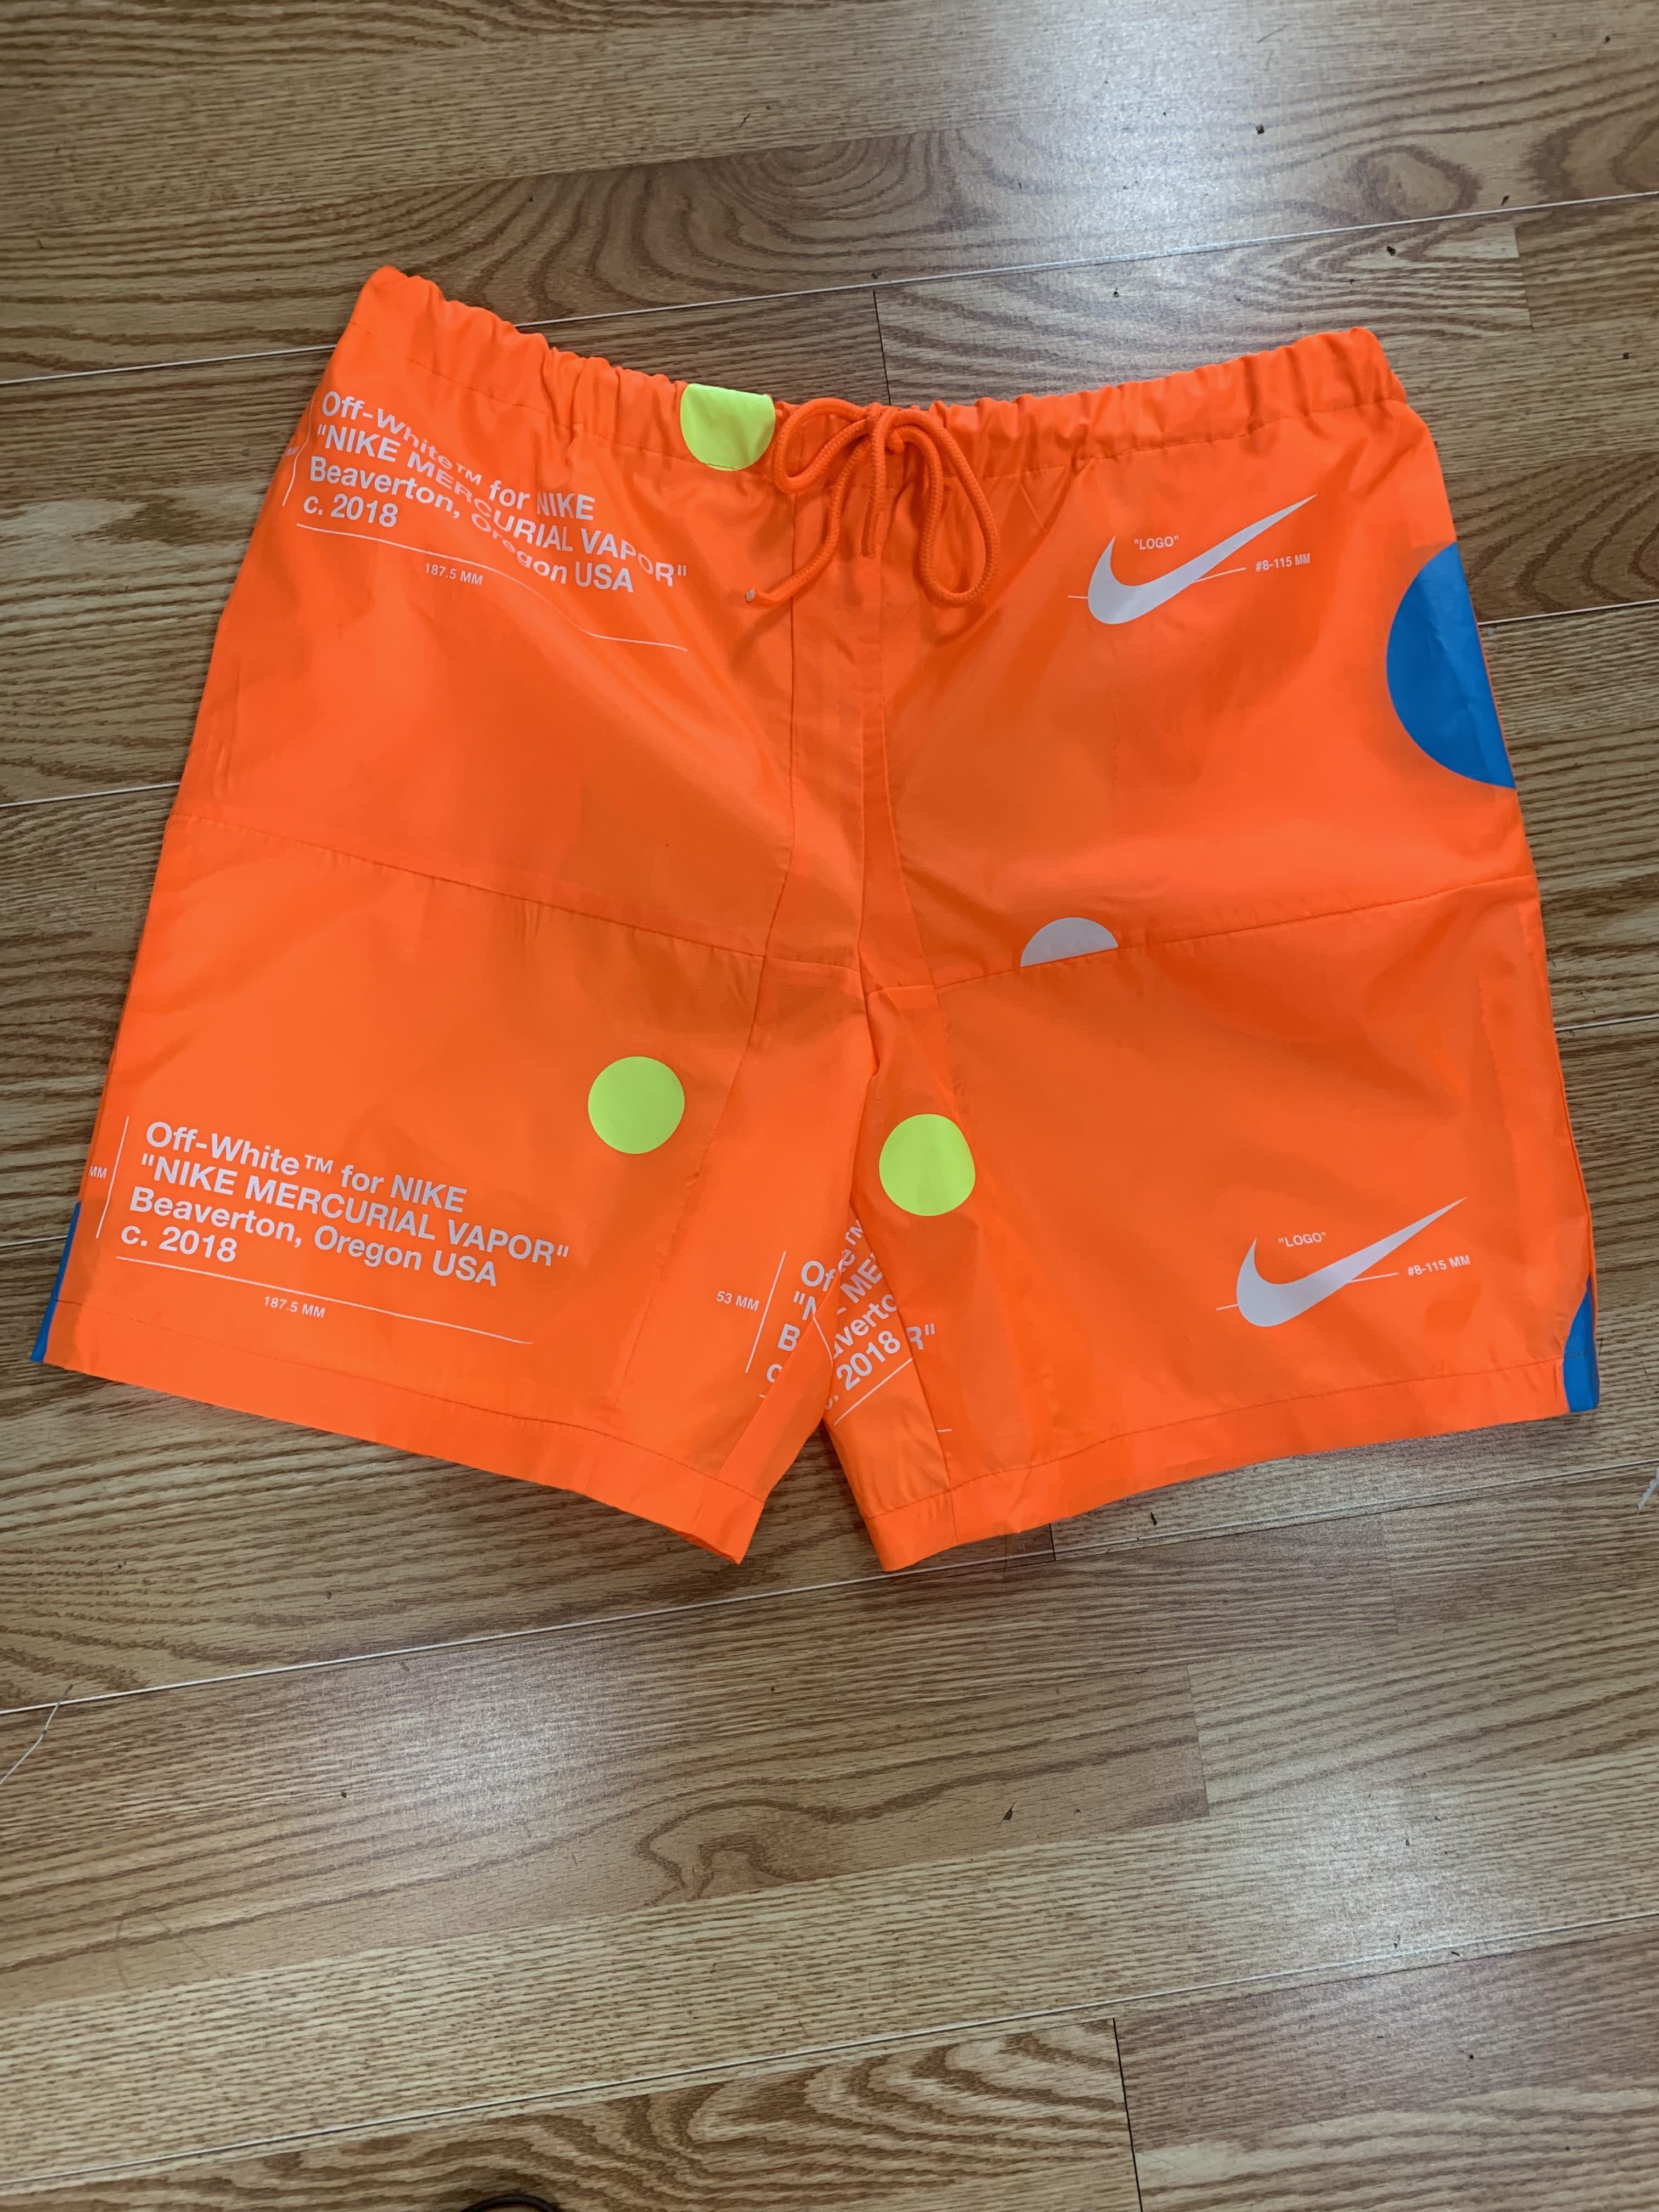 Believe it or not, these shorts started out as two Nike shoe bags!